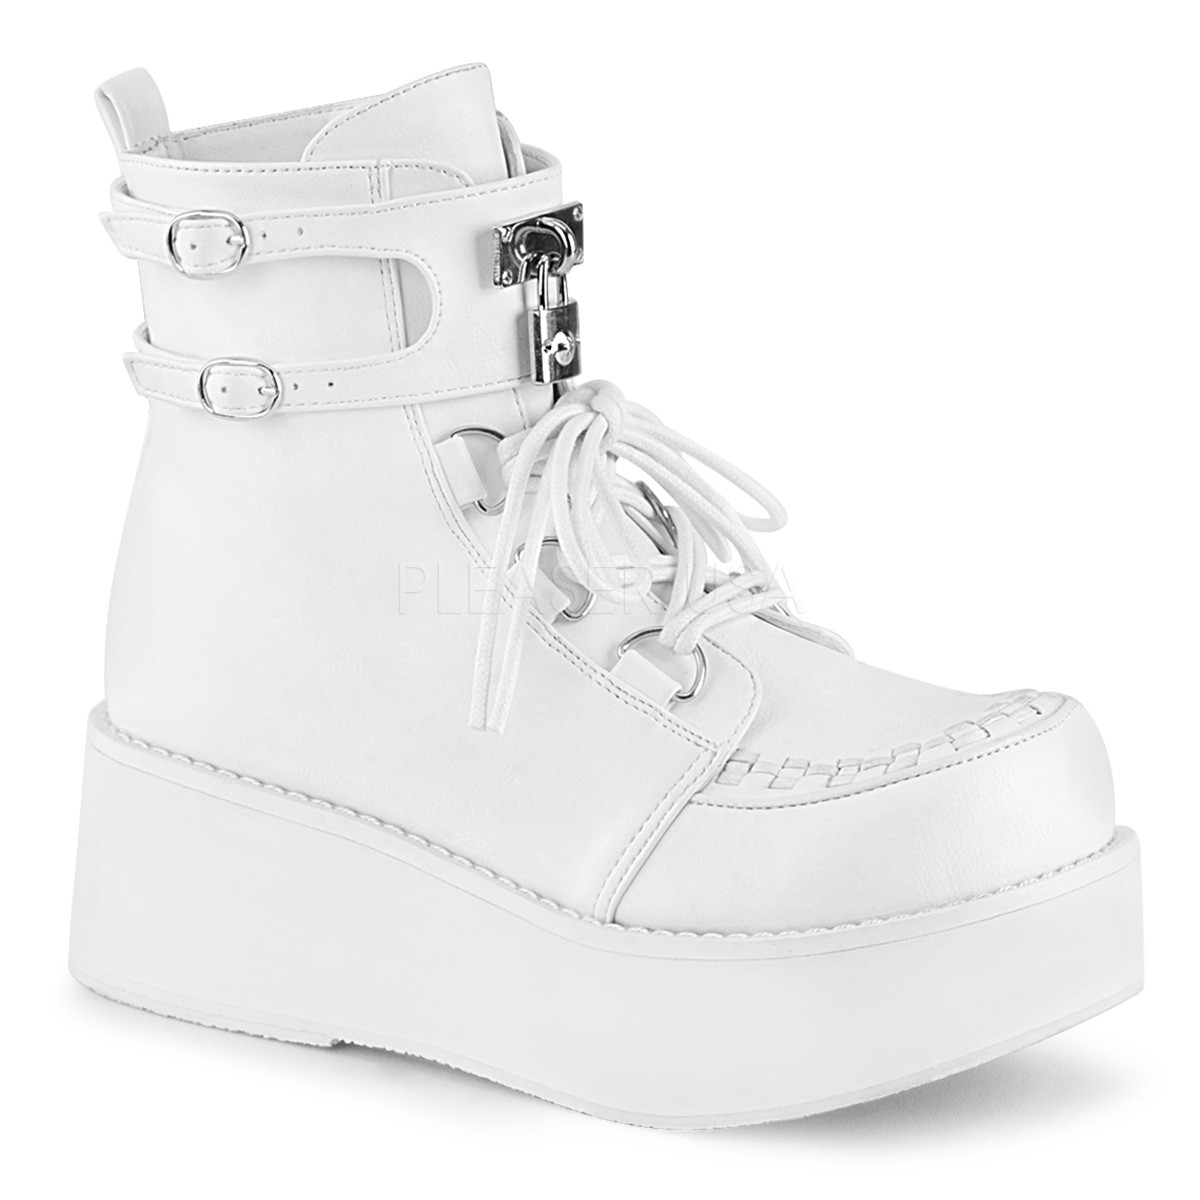 white leatherette shoes